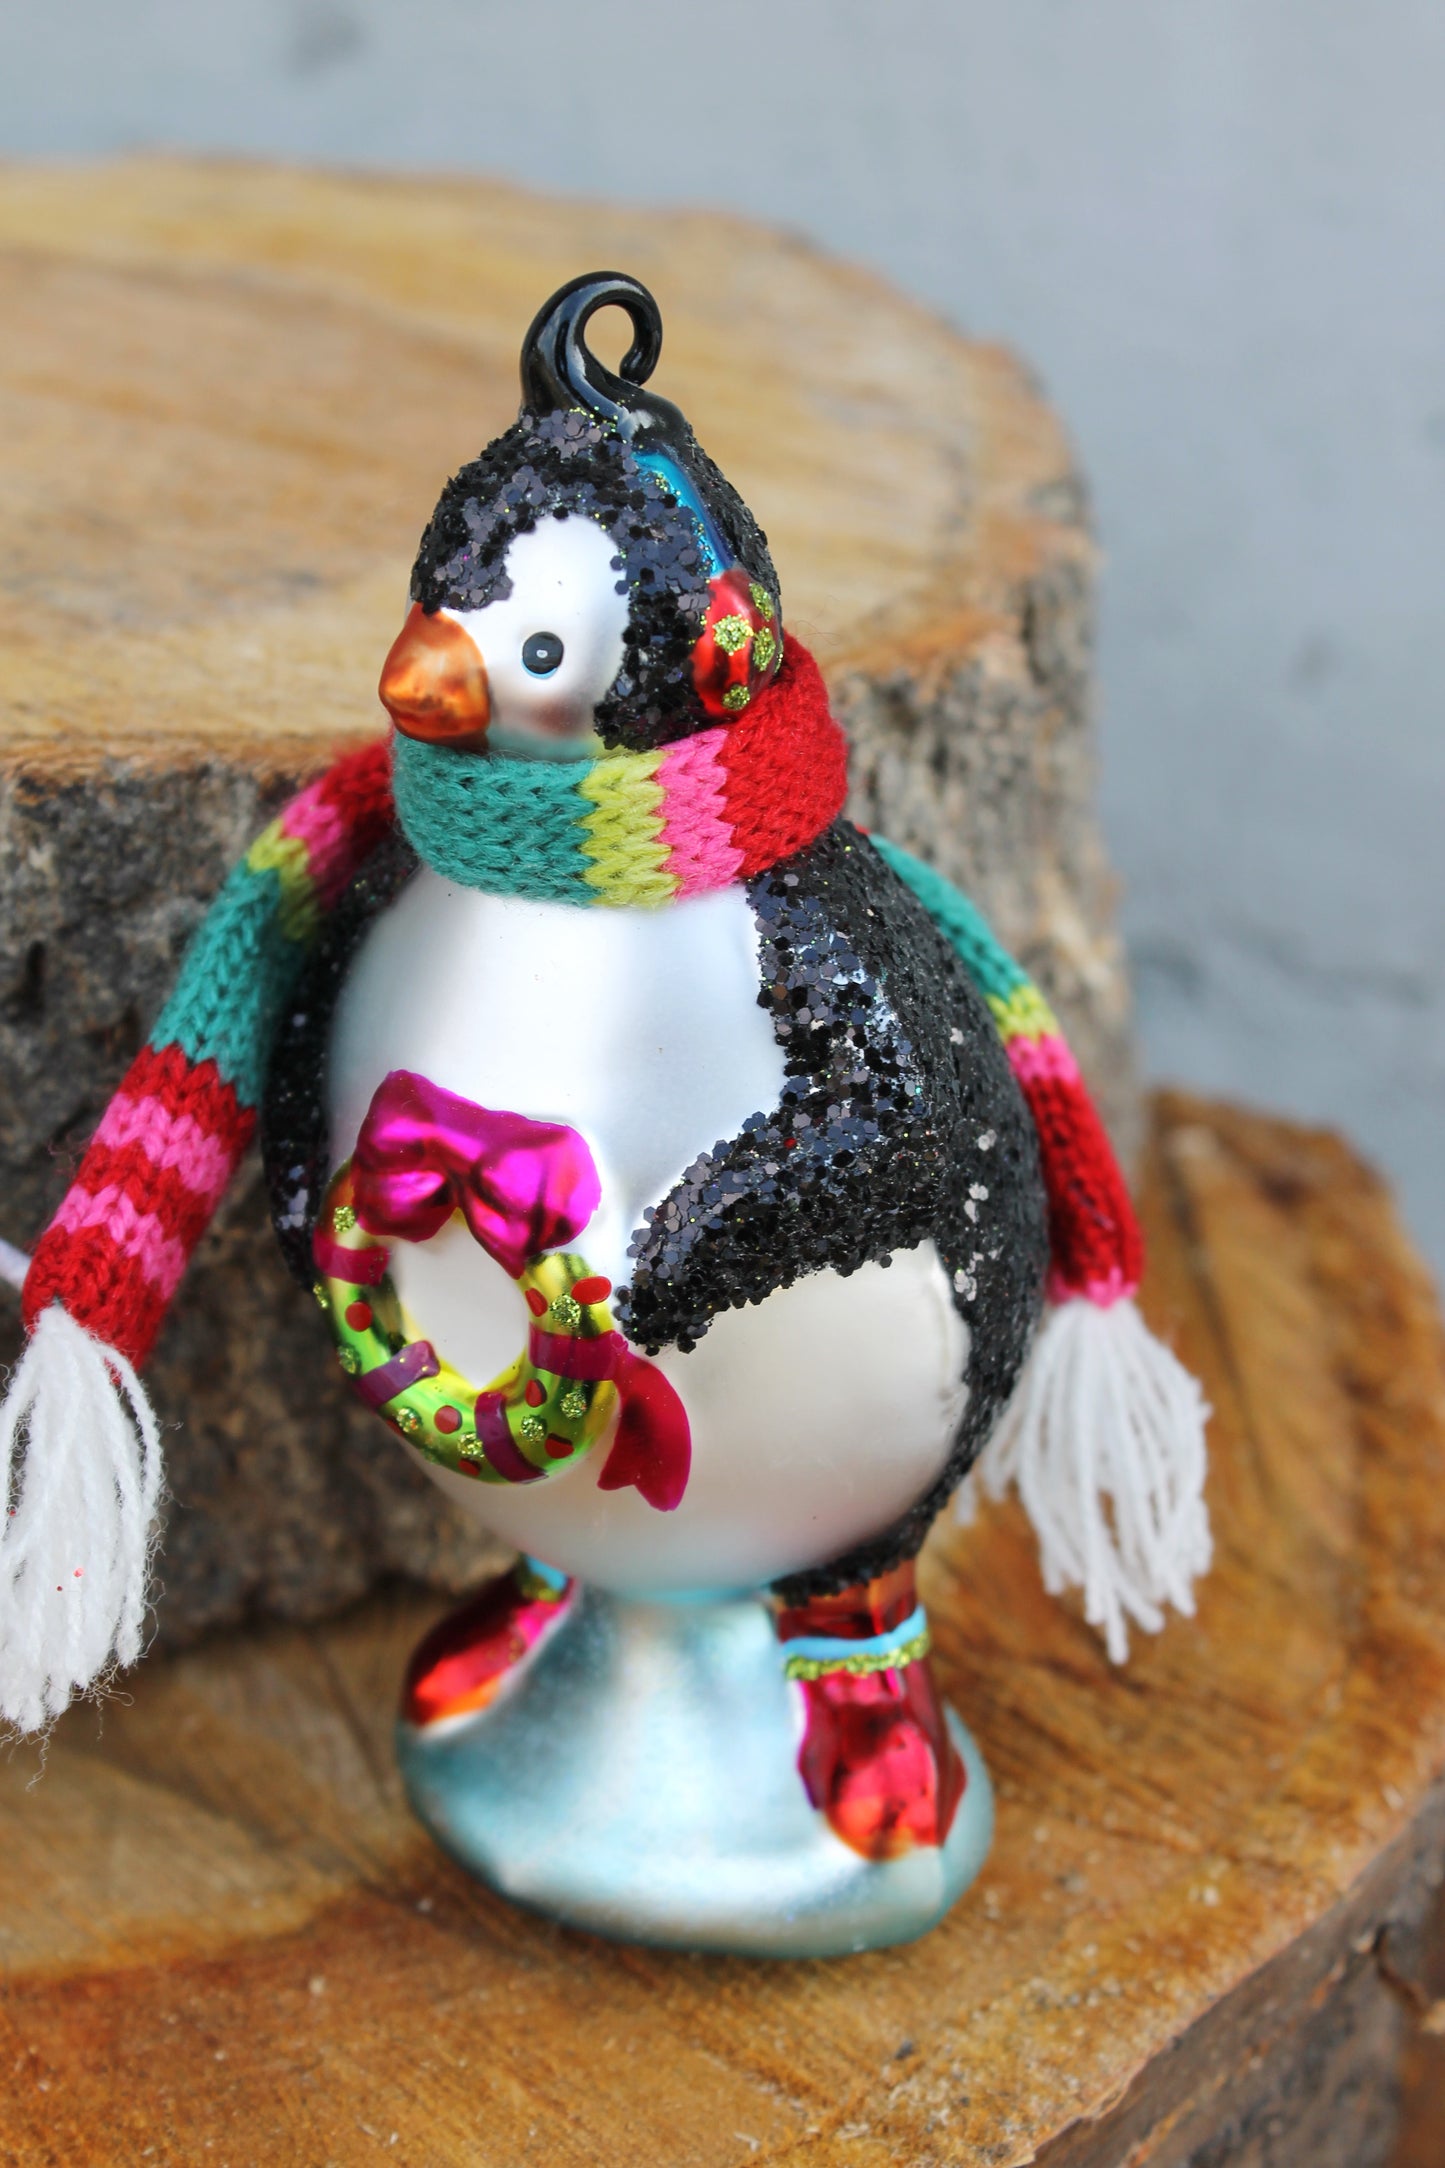 Christmas tree toys - Two penguins - Germany vintage - Christmas - New Year Glass Ornament, Made in Germany - 2000s